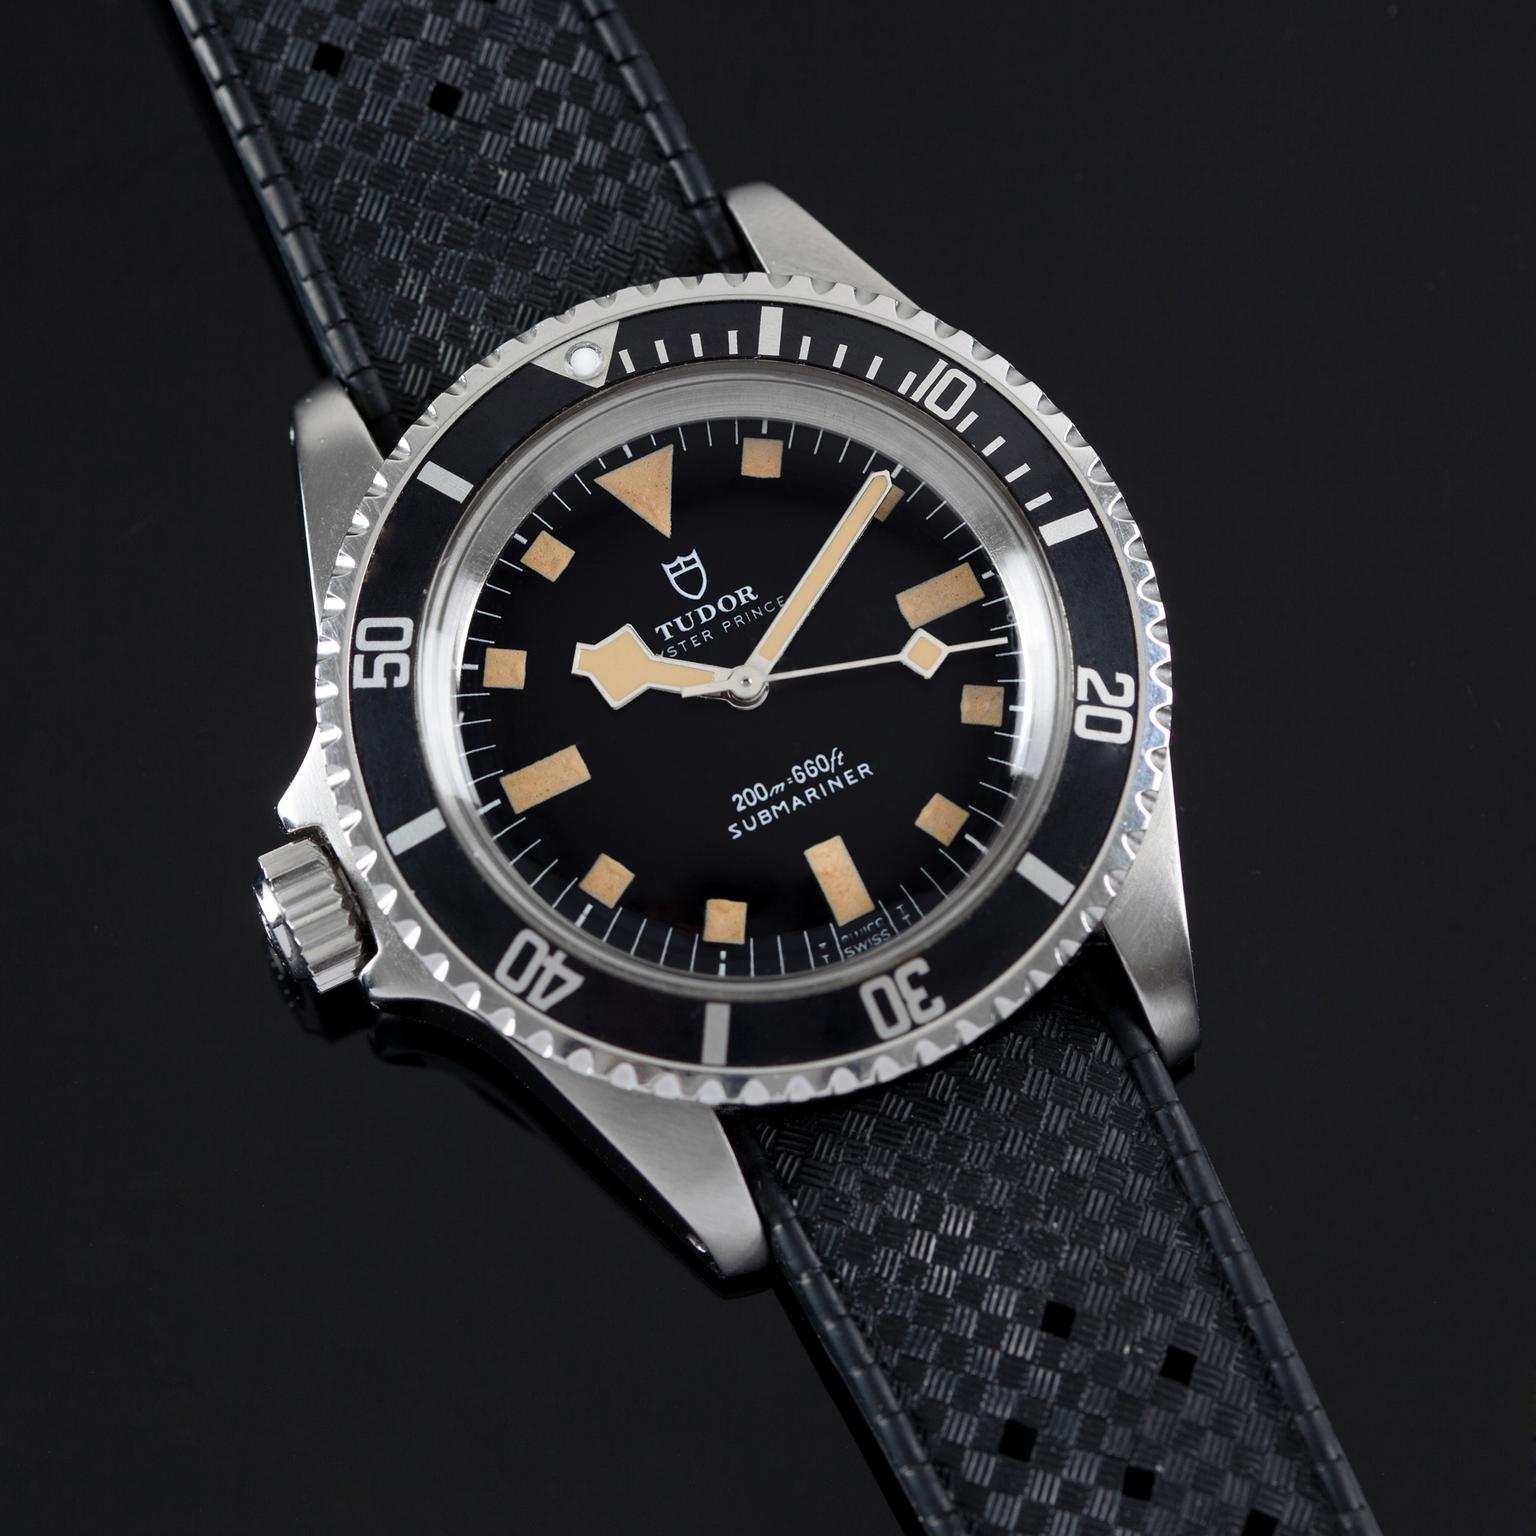 Reference 9401 - Tudor's left-handed dive watch for the french navy